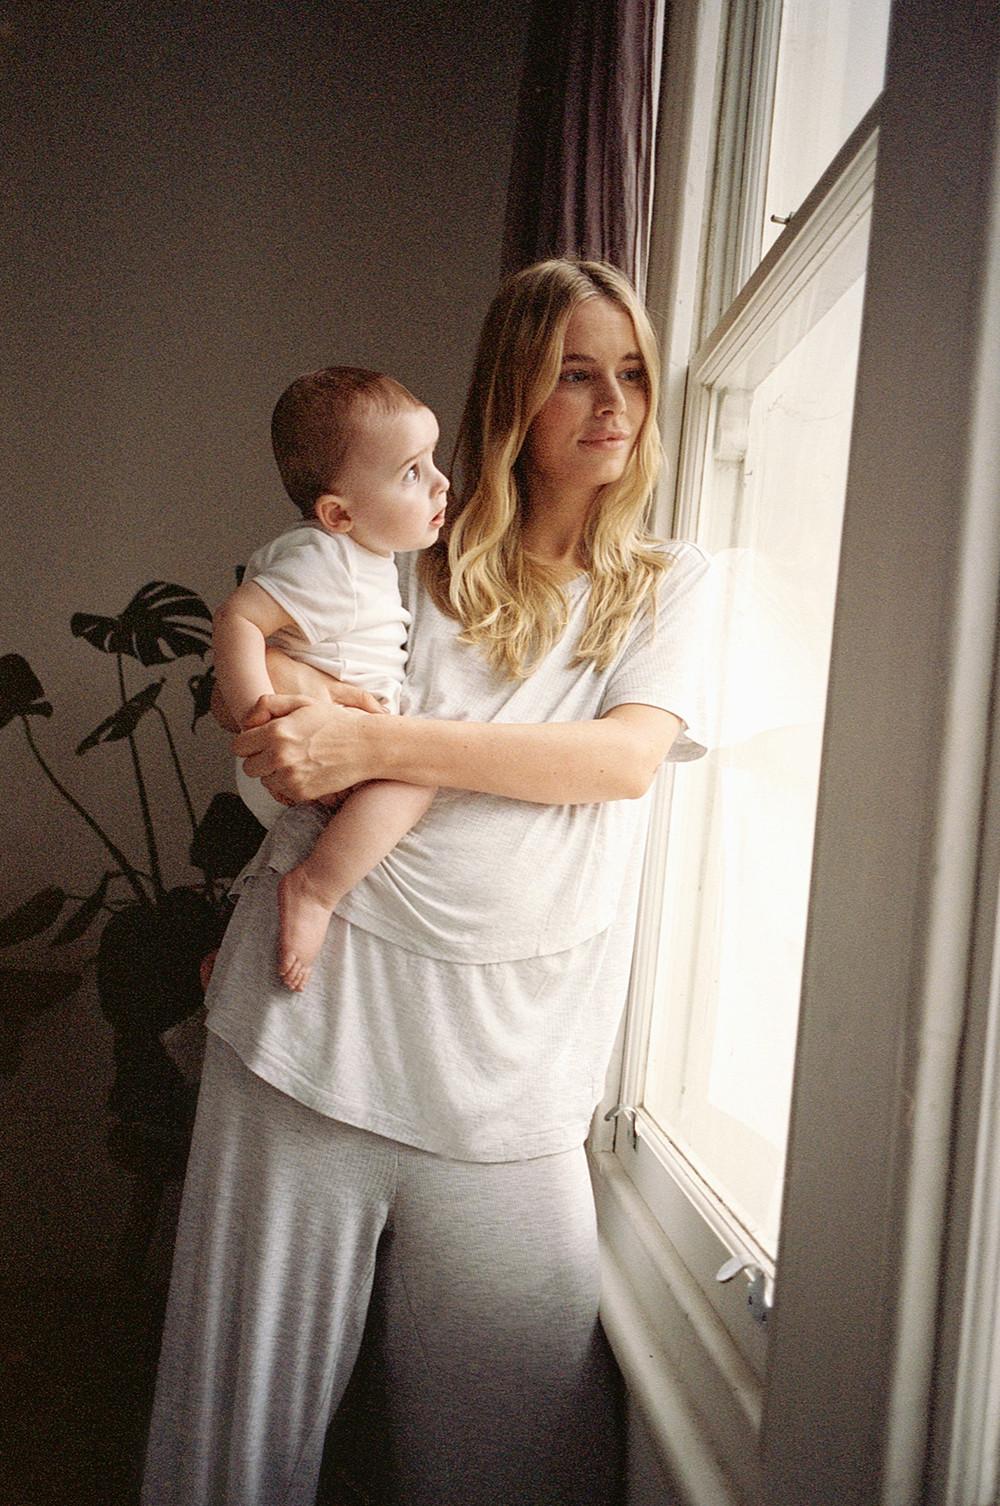 model wears maternity pyjamas with grey bottoms and white top